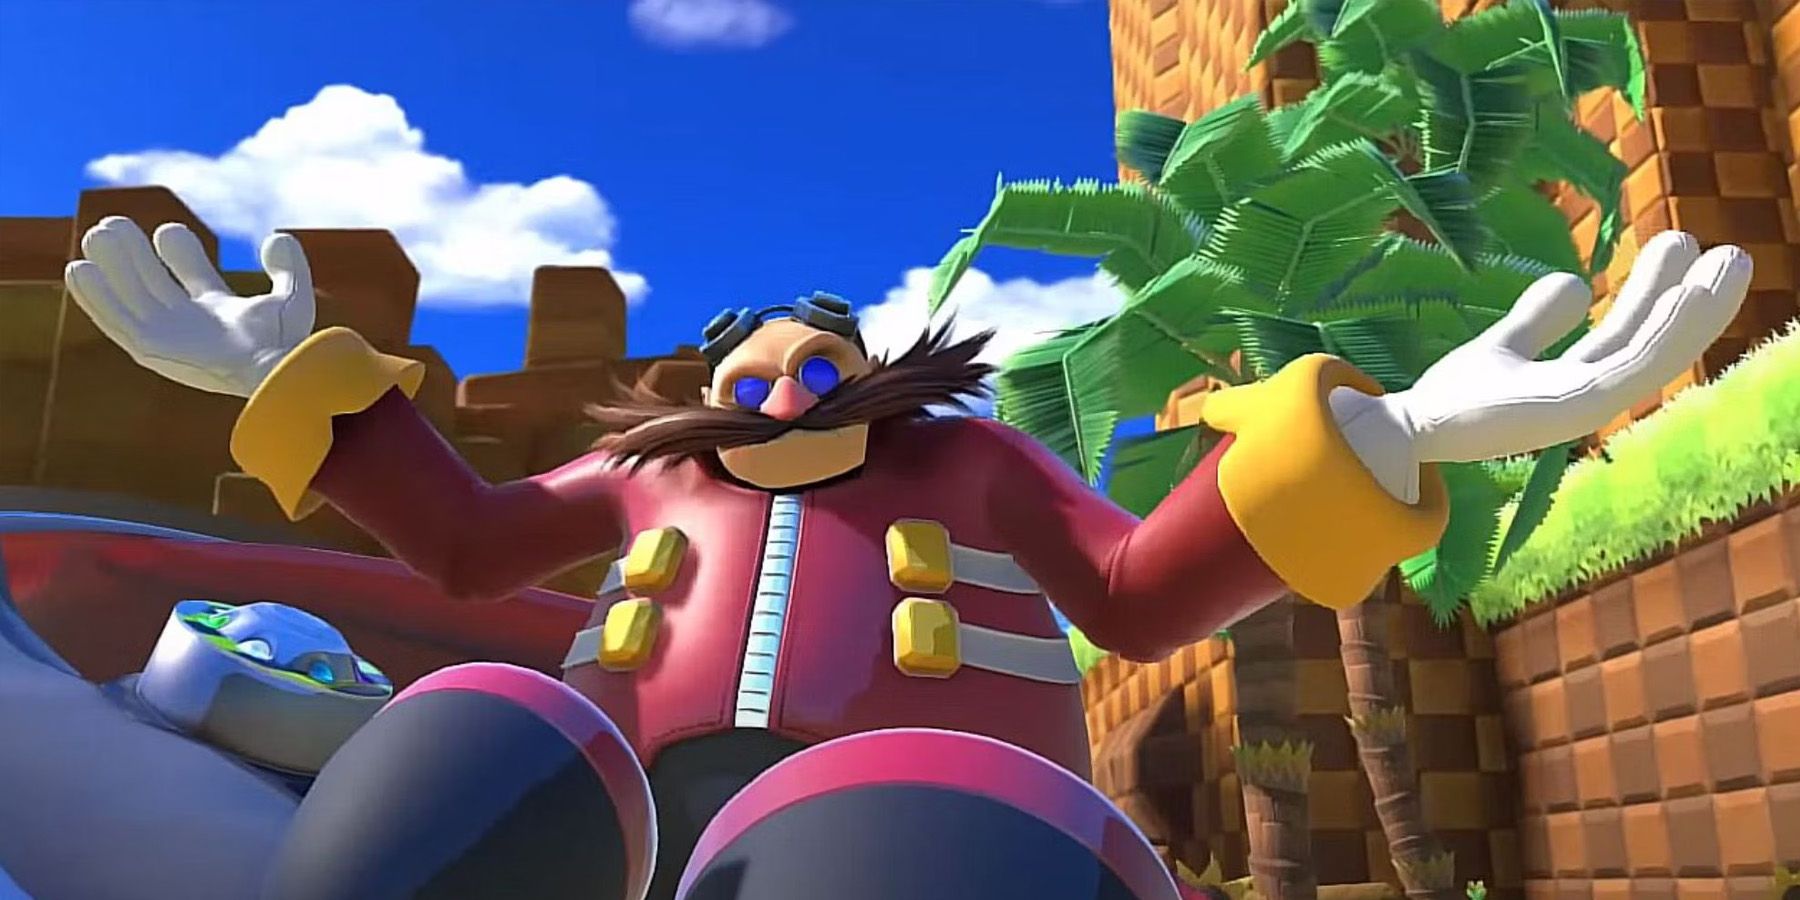 A screenshot of Dr. Eggman in his Egg Car from Sonic the Hedgehog.